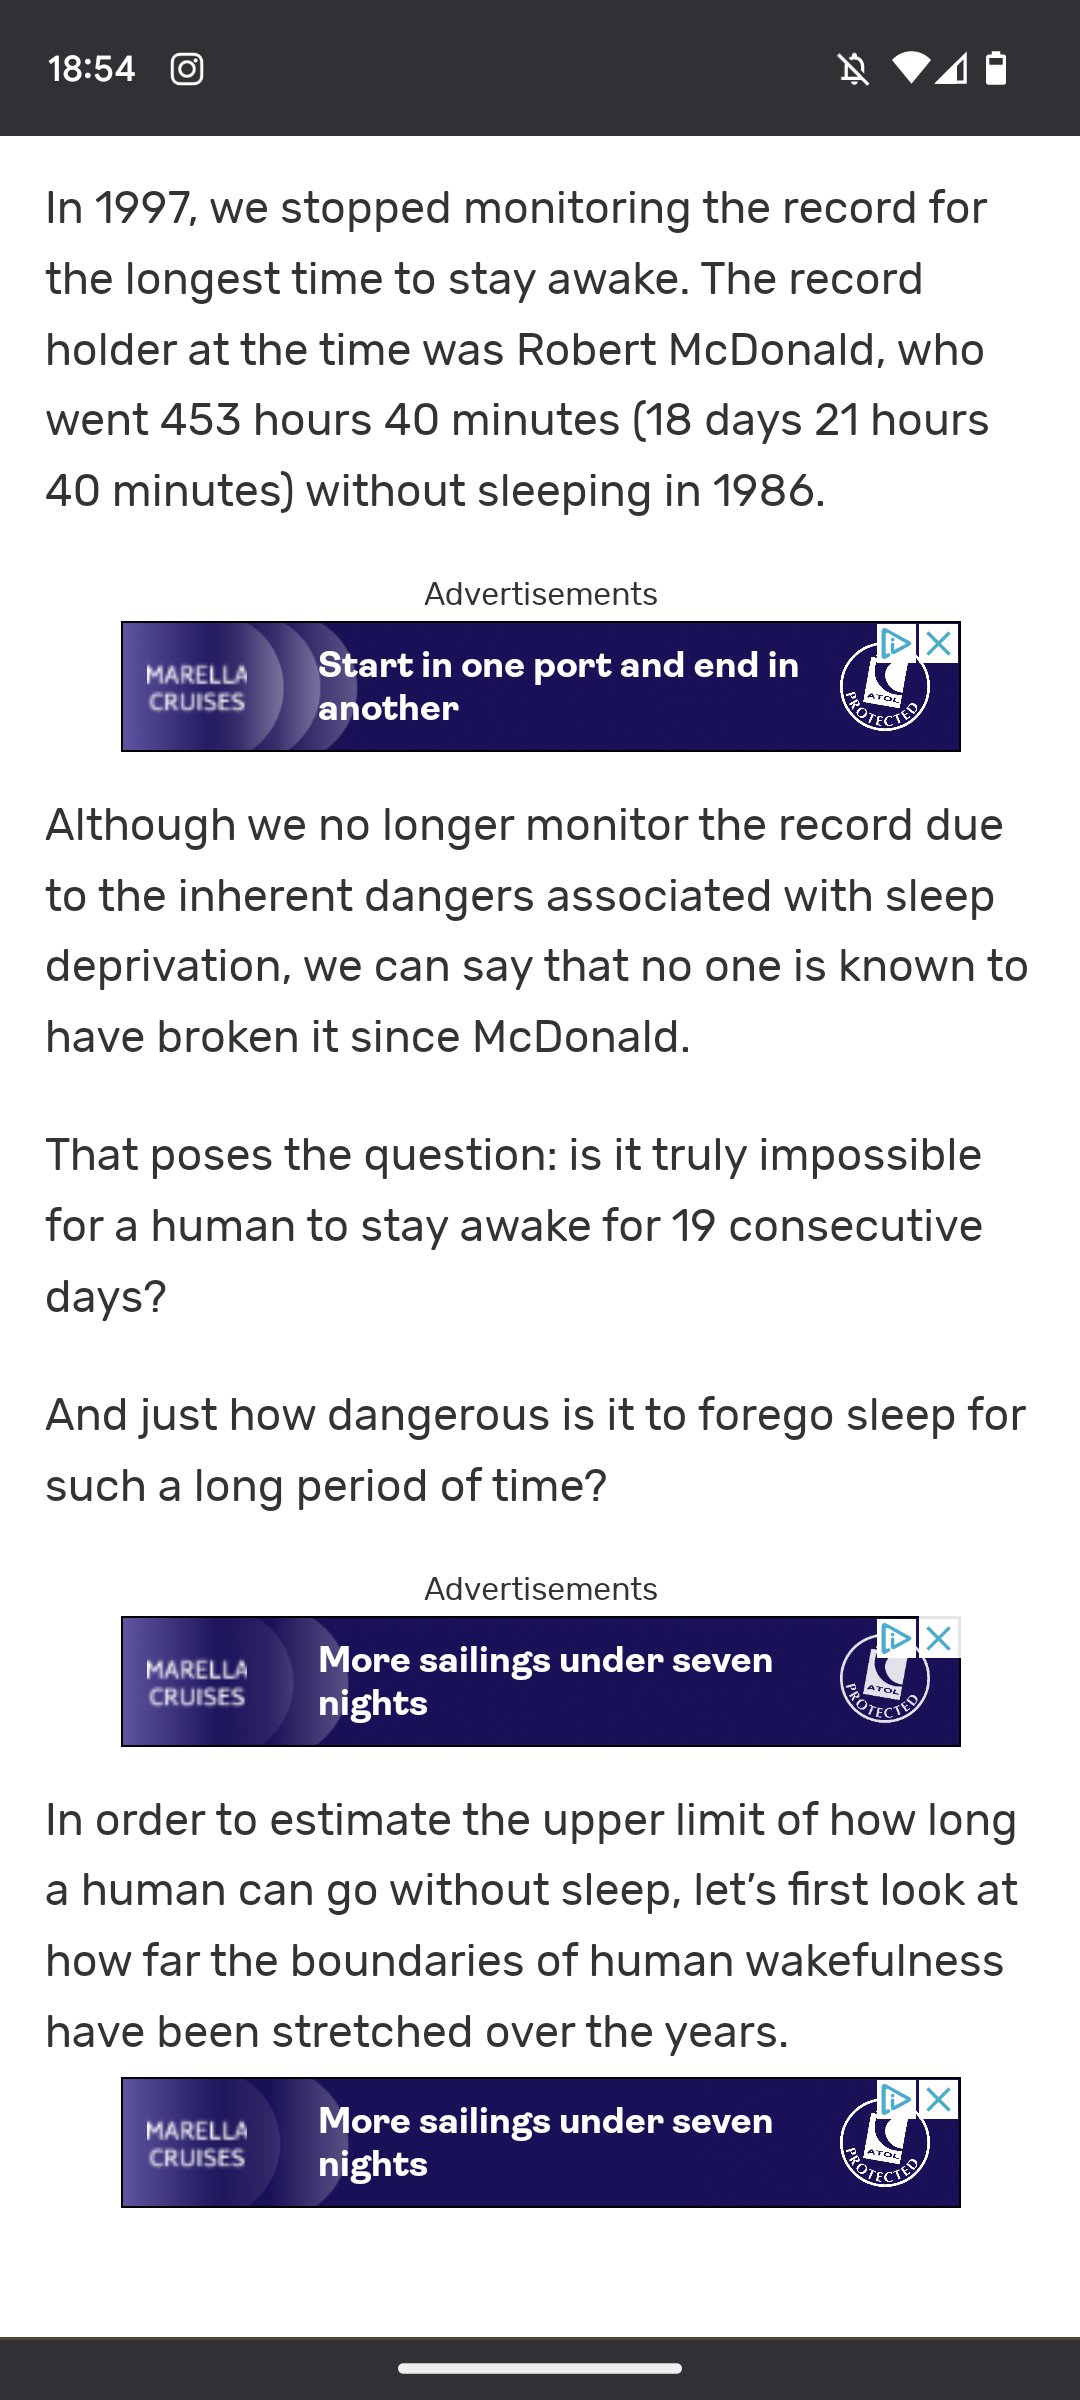 Screenshot of the Guinnes World Records website on the record for longest without sleep, stating that it stands at 453 hours 40 minutes from 1986, and that they stopped recognising new records in 1997 due to safety concerns.